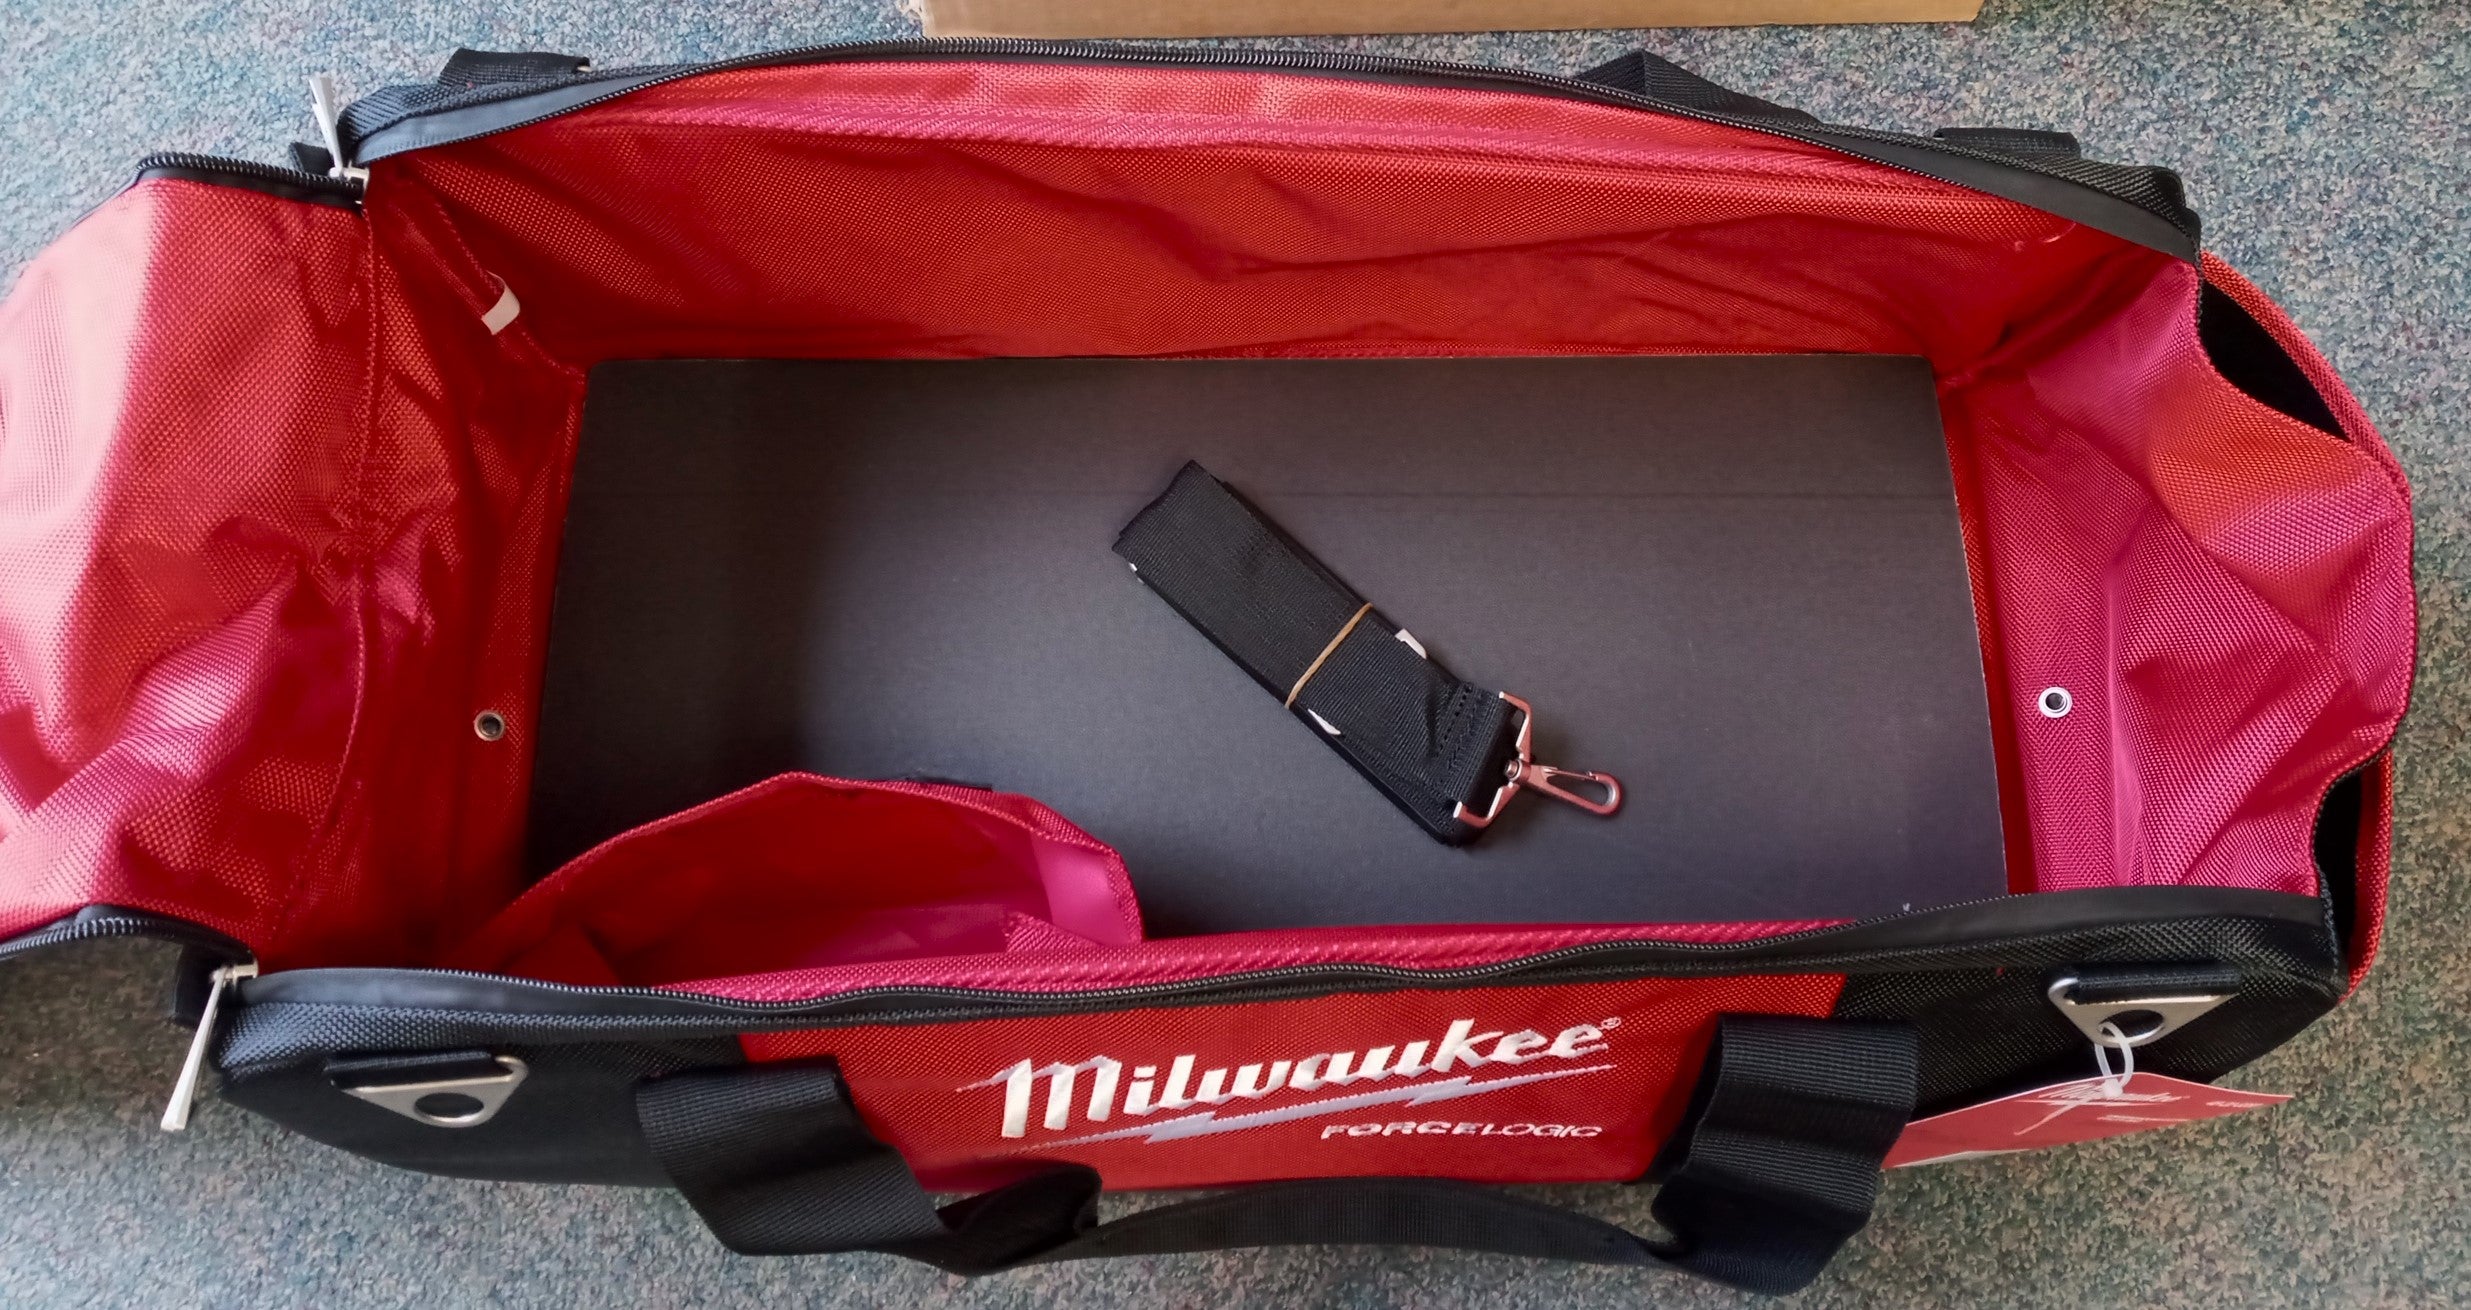 Milwaukee 48-22-8280 Underground Cable Cutter Utility Bag